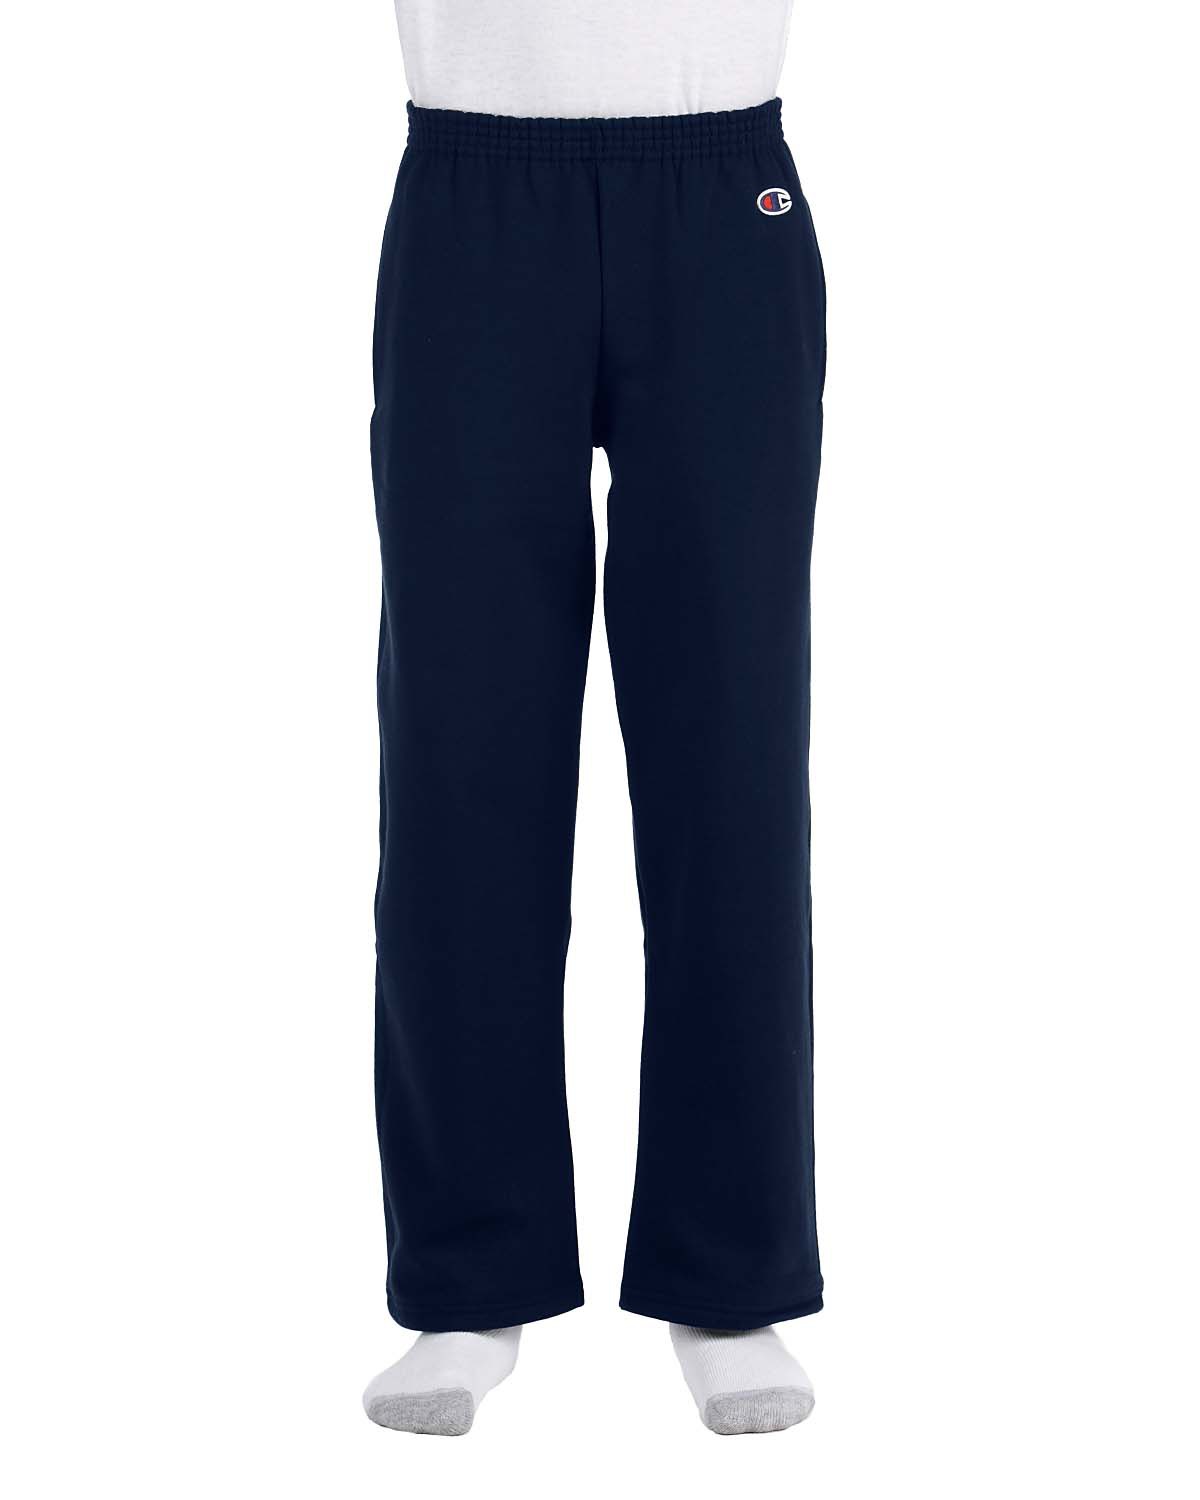 Georgetown Champion Powerblend Banded Bottom Pant